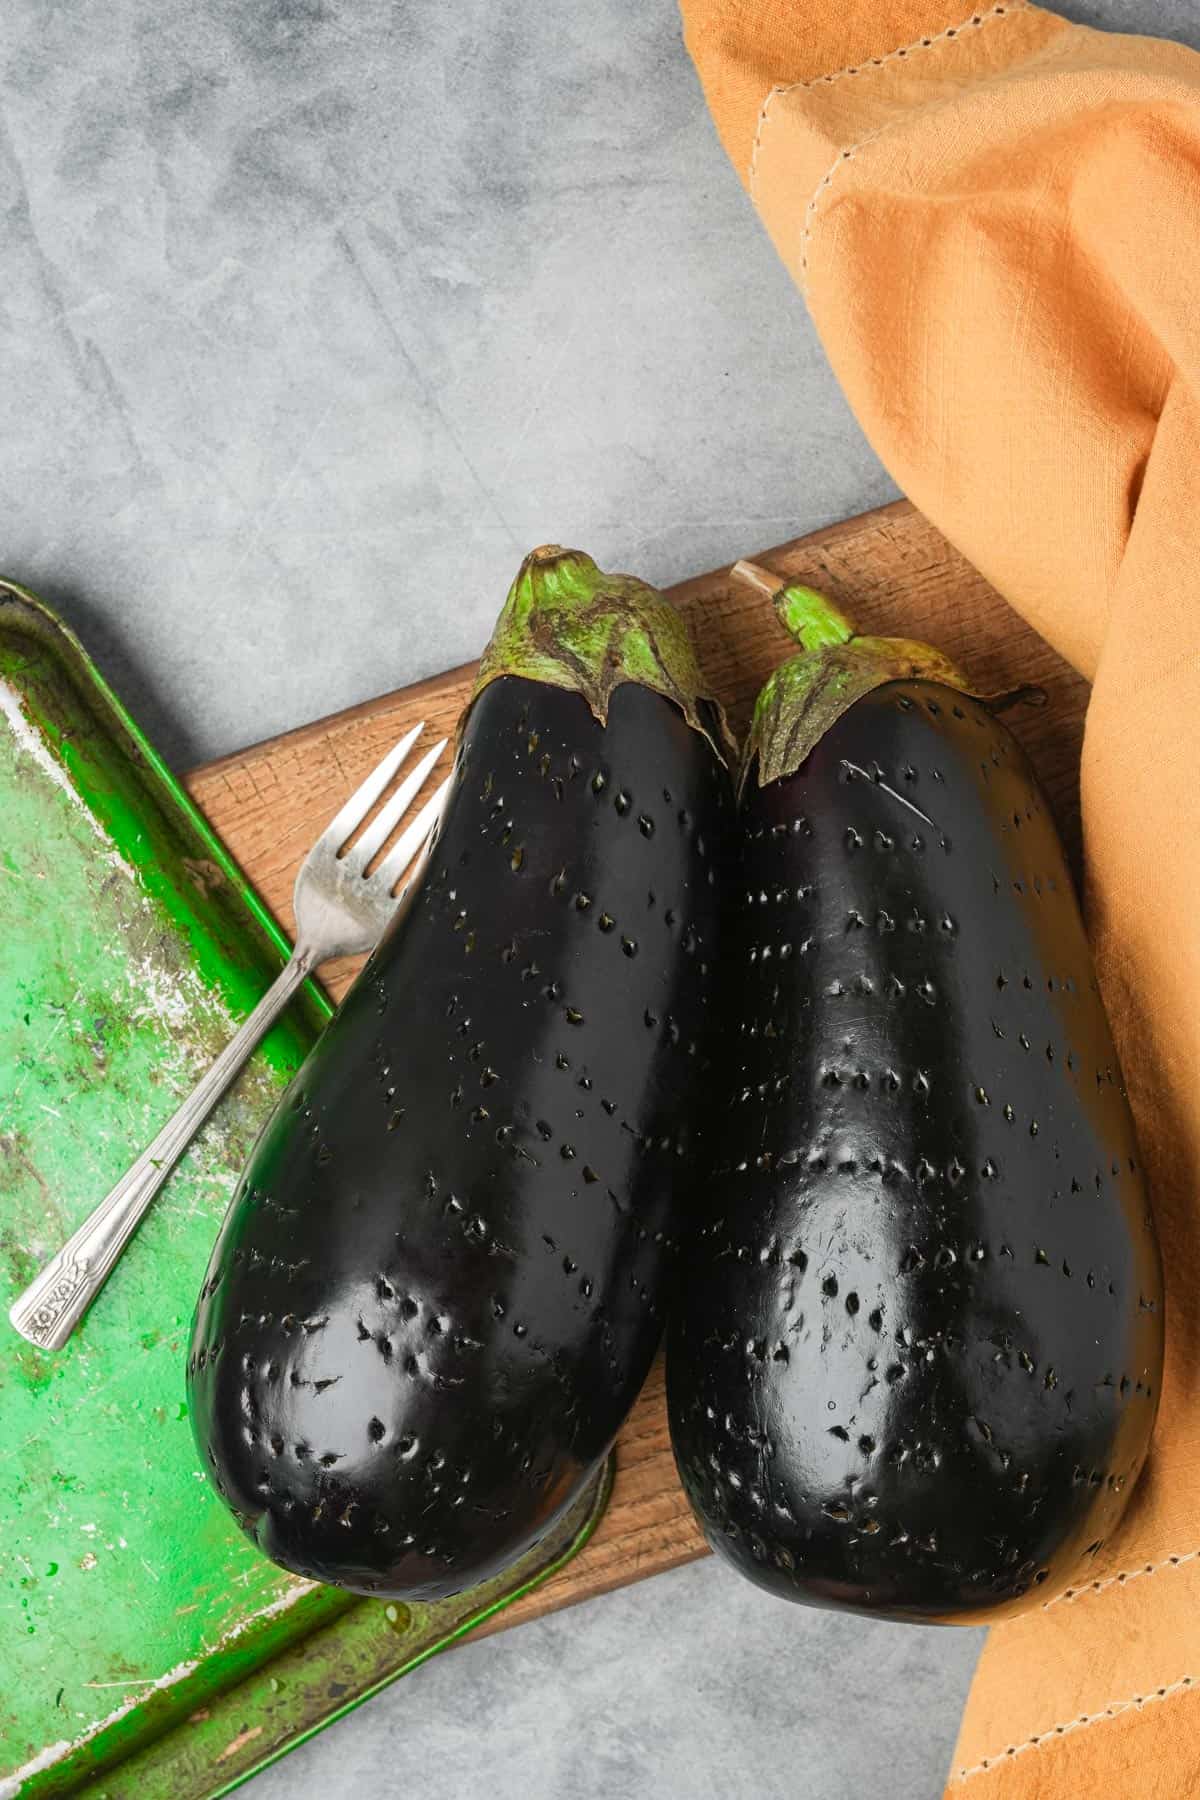 Two black eggplants pierced all over with fork pricks on a tray.